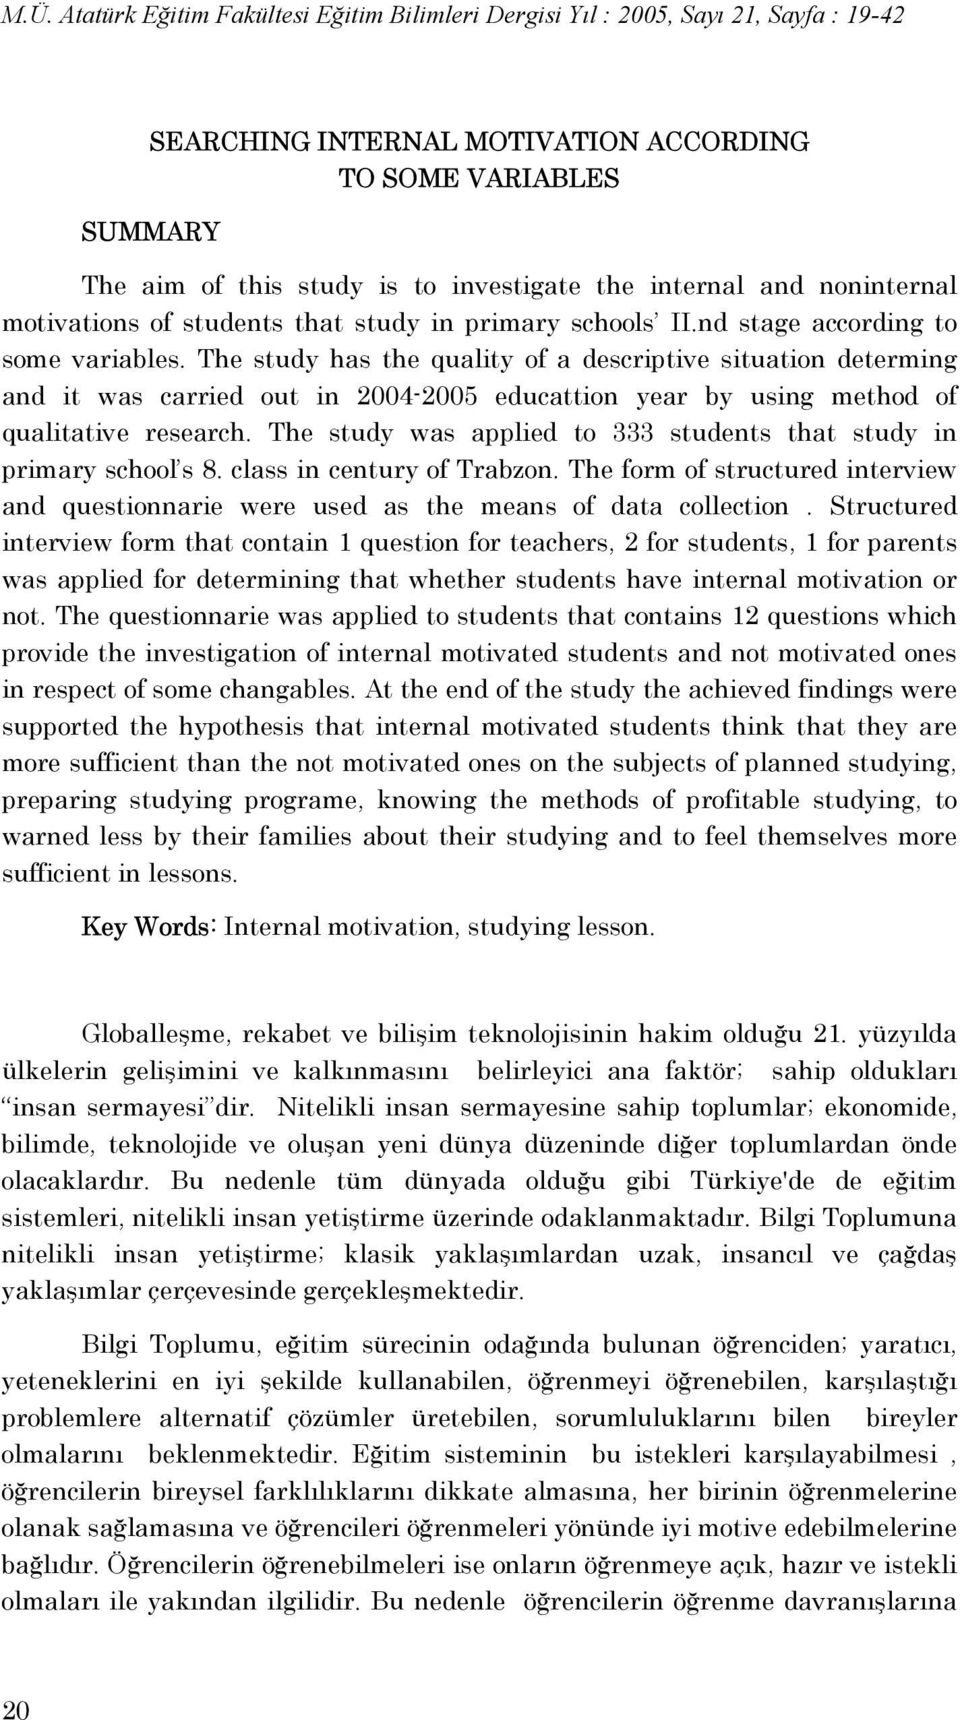 The study was applied to 333 students that study in primary school s 8. class in century of Trabzon. The form of structured interview and questionnarie were used as the means of data collection.